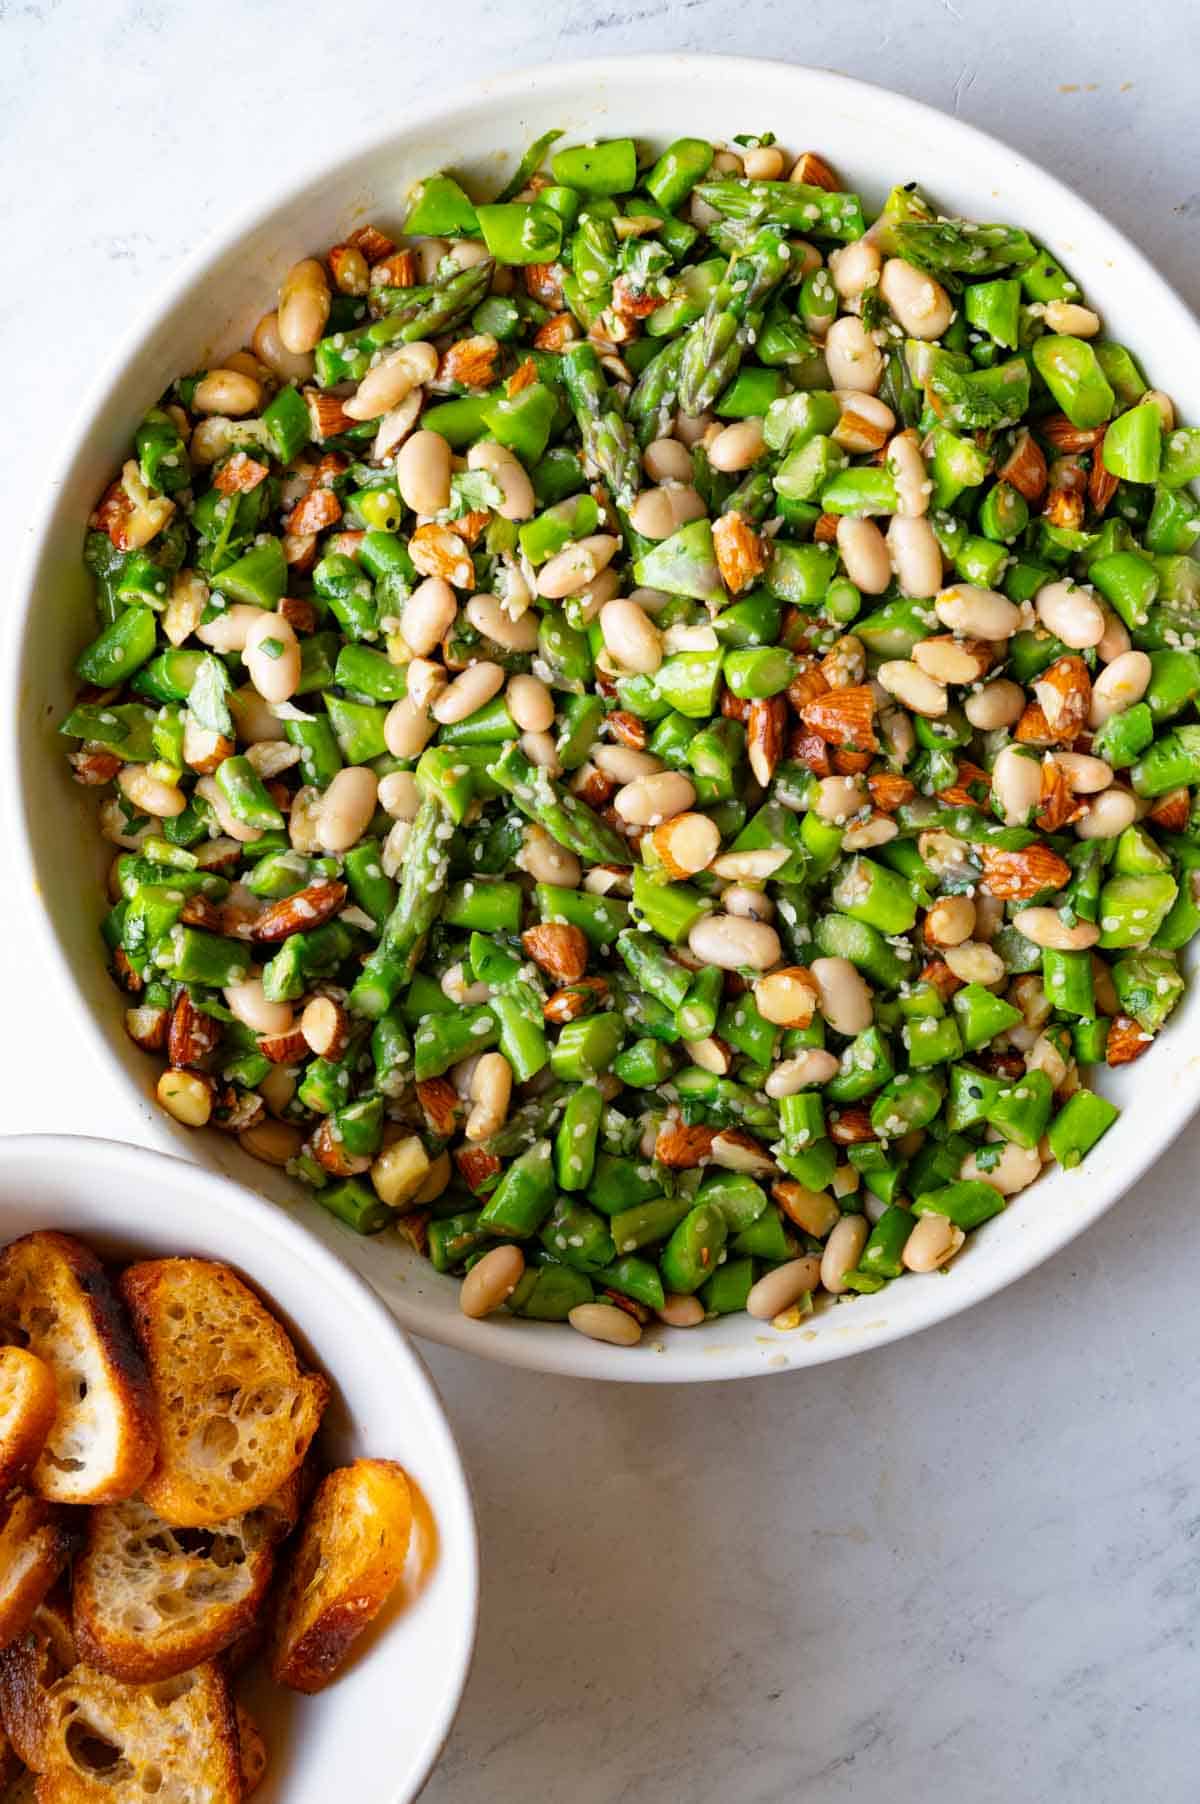 Chopped asparagus, white beans, almonds, miso dressing, and sesame seeds in a white bowl next to a small white bowl of crostinis.